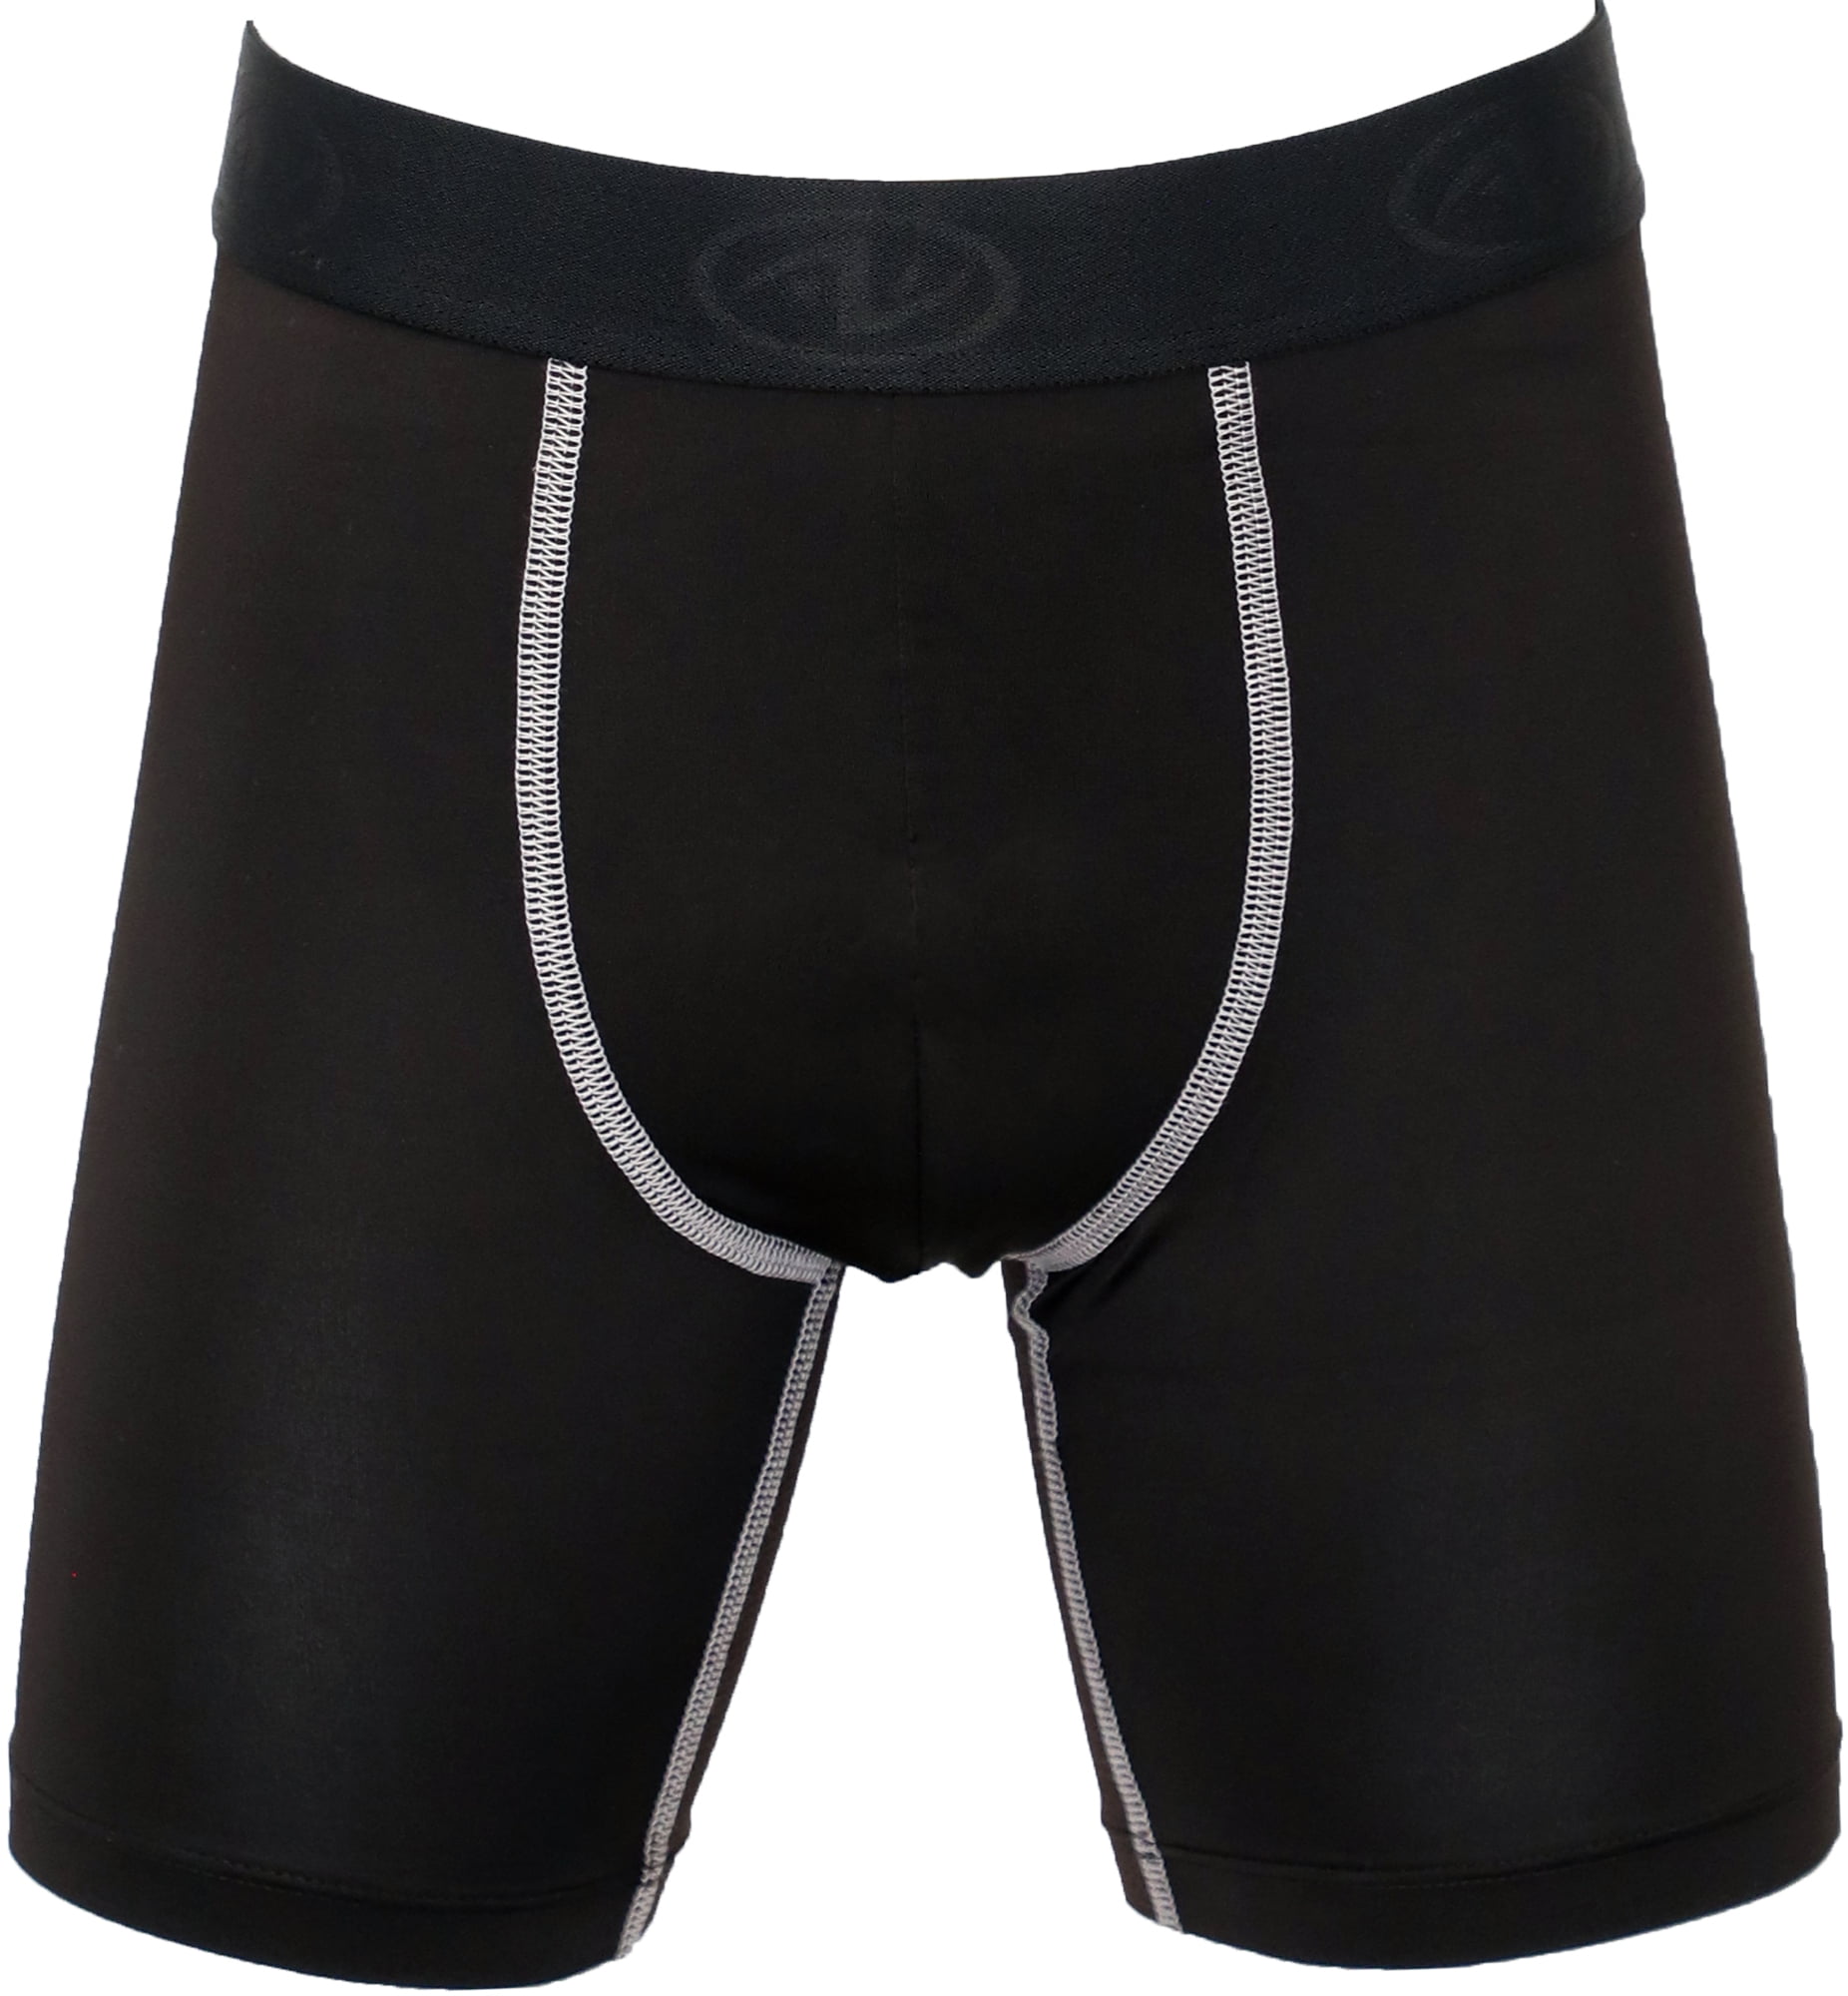 Details about   New Ace 3M Youth Compression Shorts with Protective Cup Free Expedited Shipping 